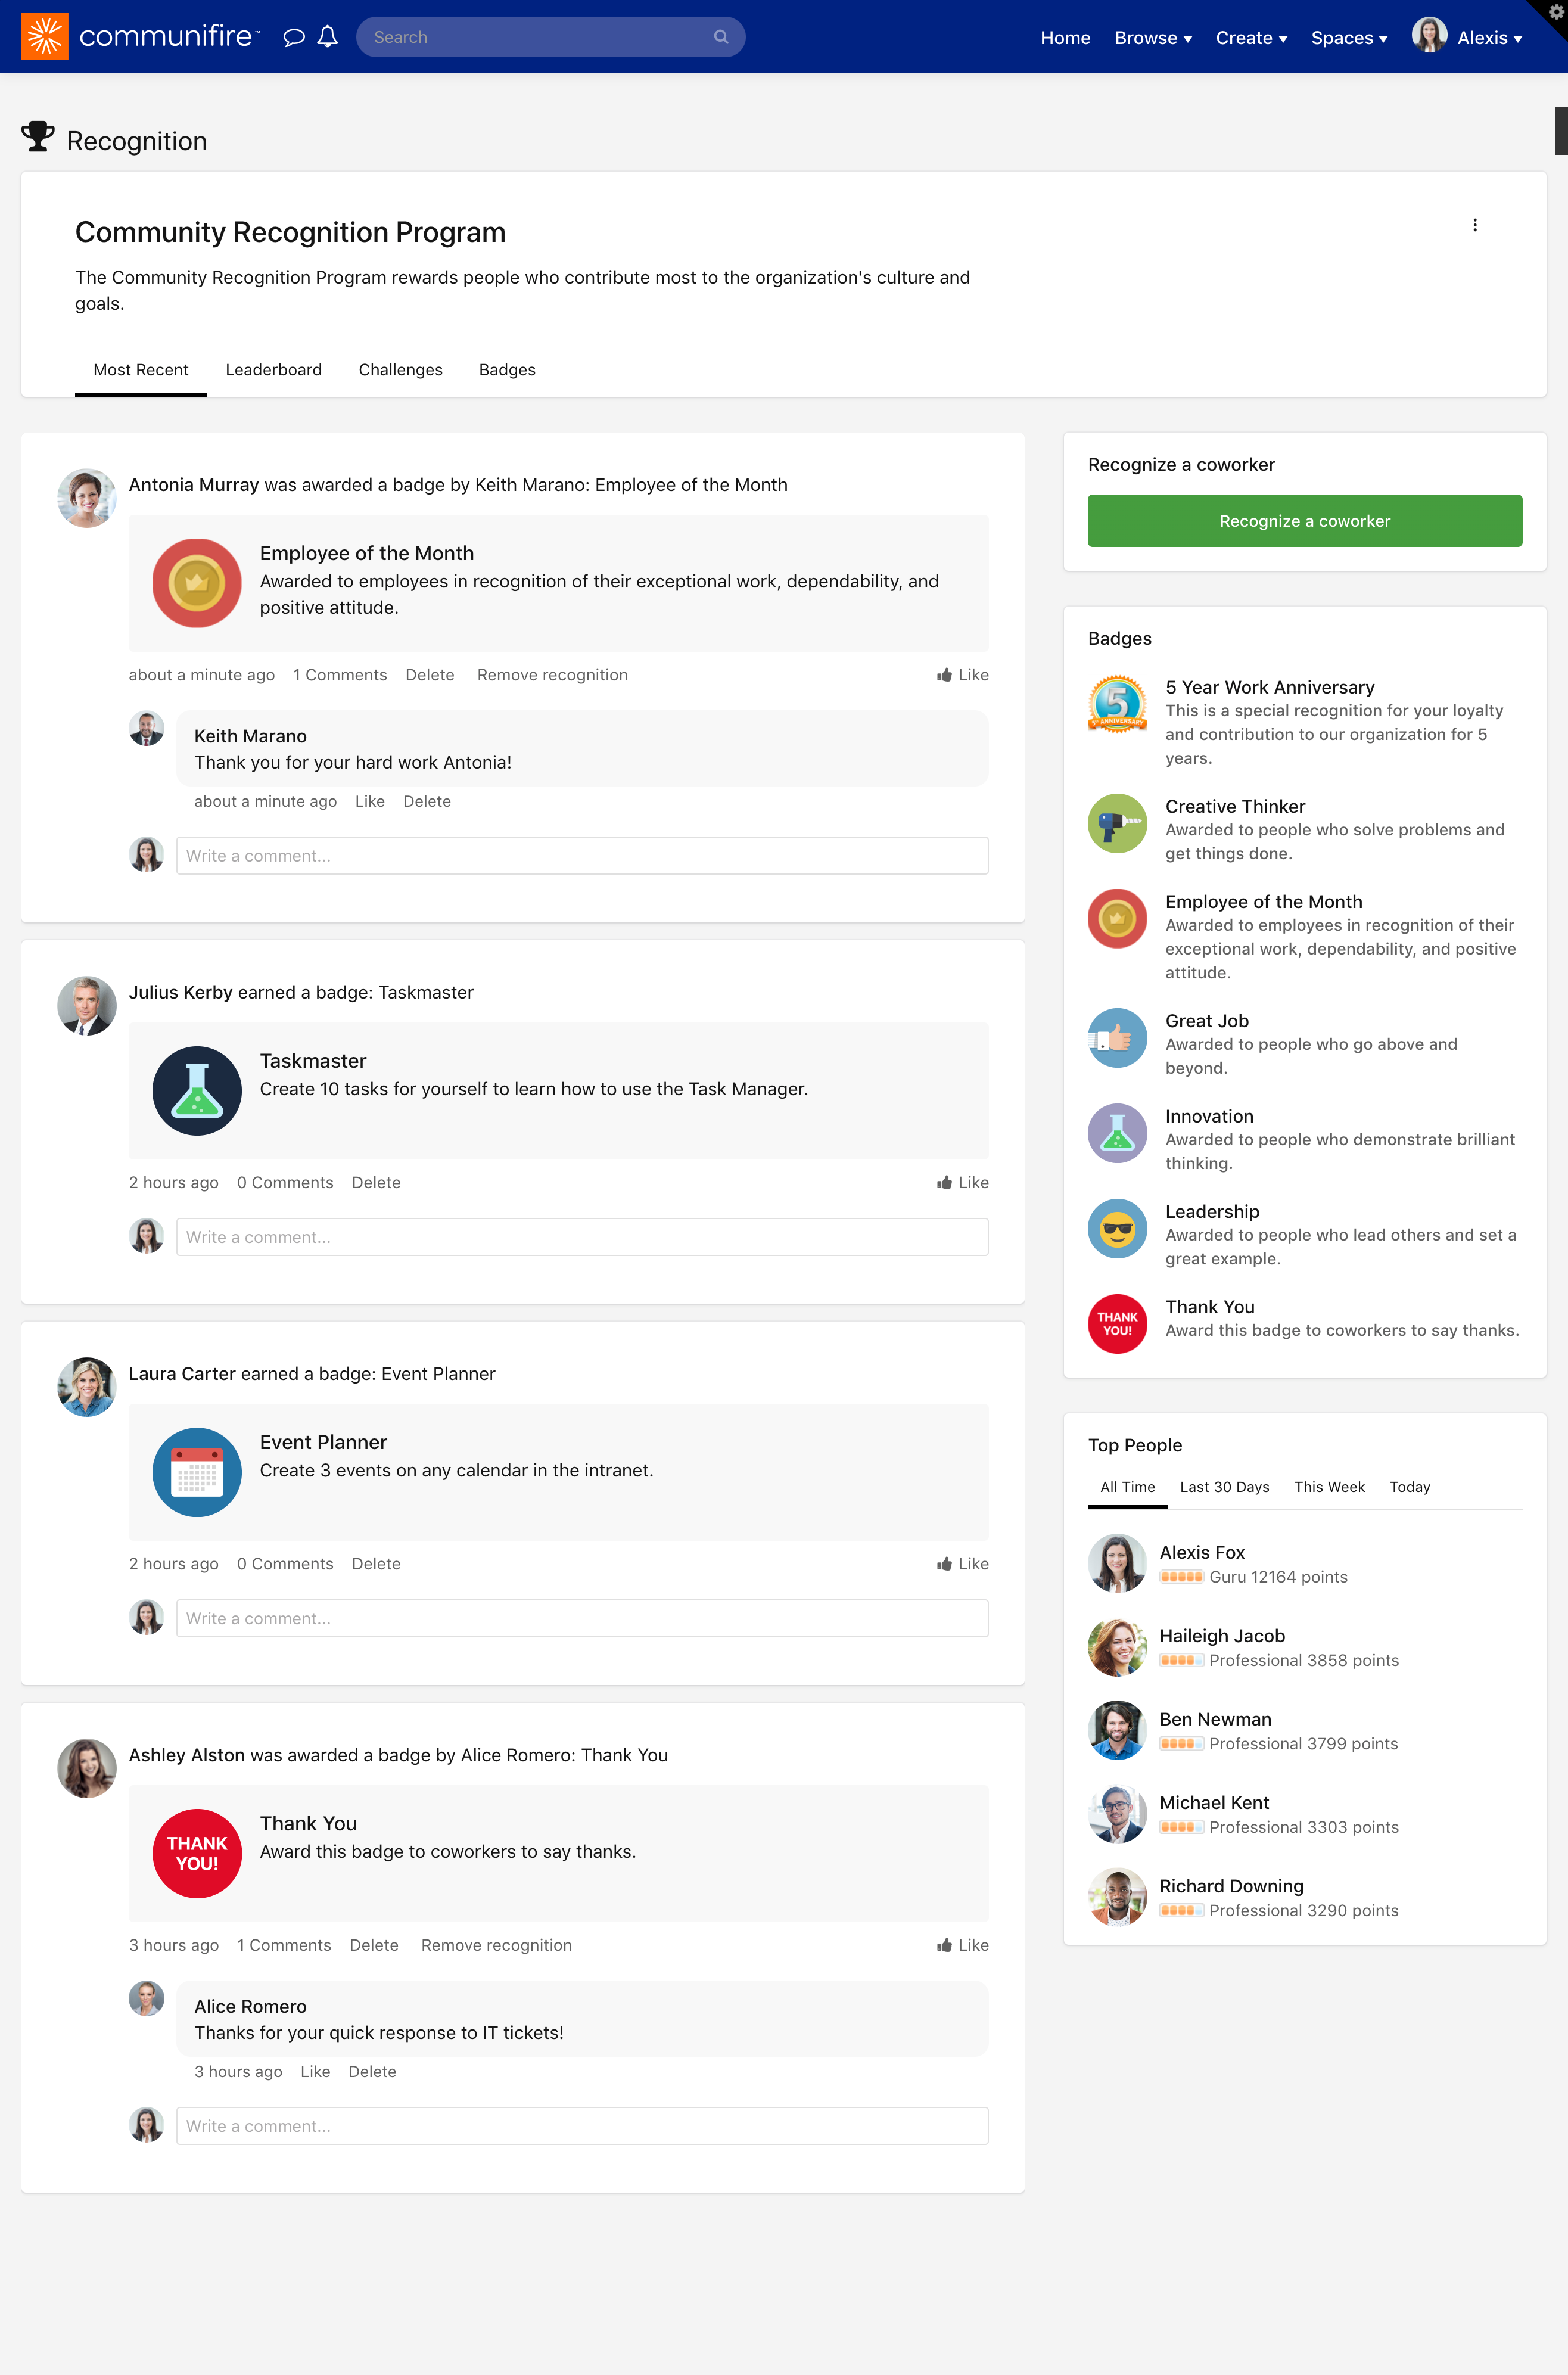 Recognition Activity Page